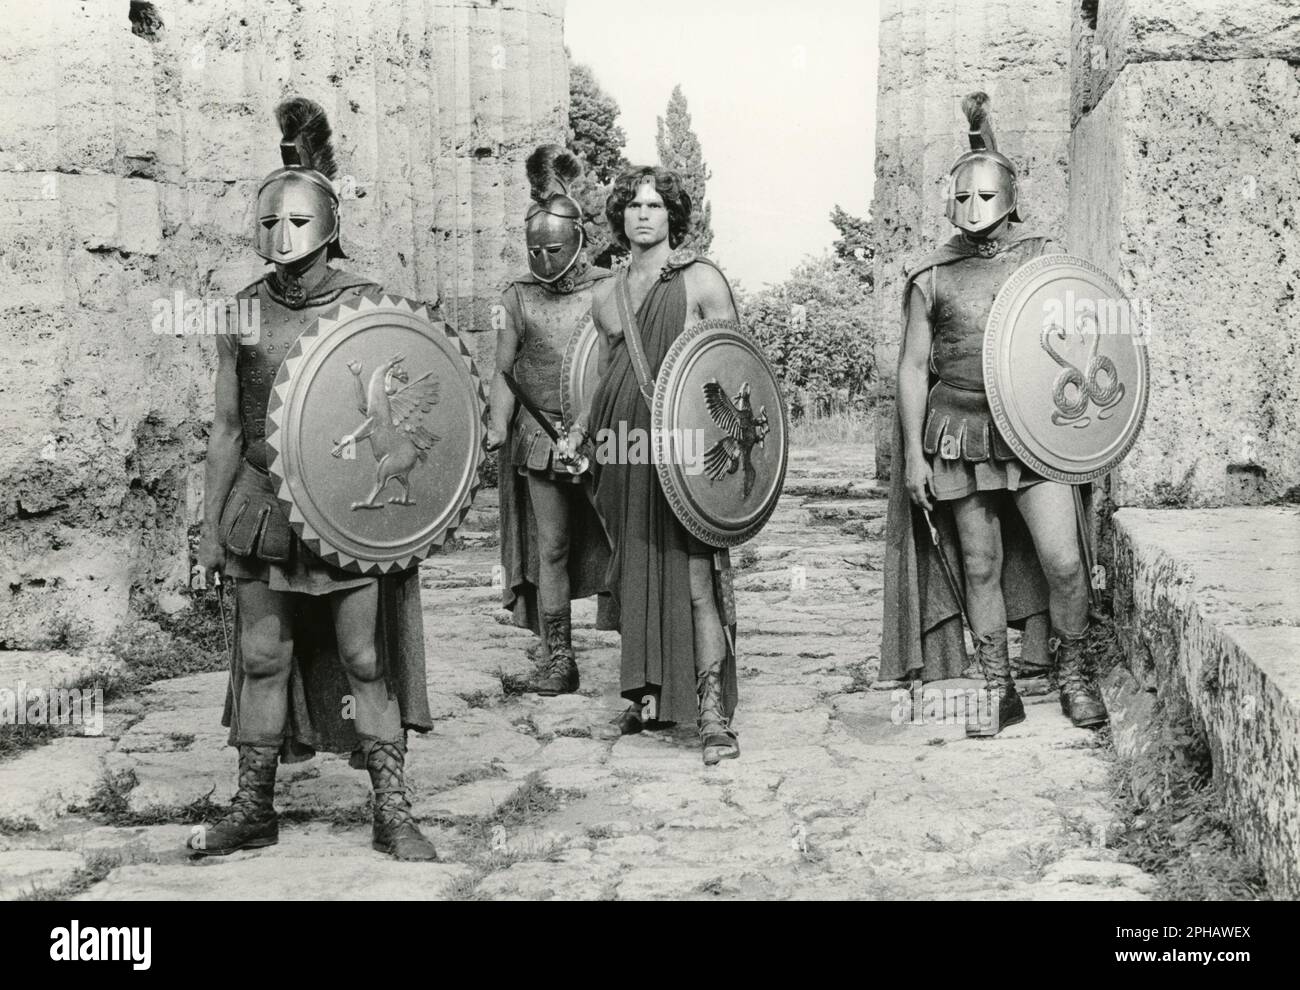 Clash of the titans 1981 hi-res stock photography and images - Alamy